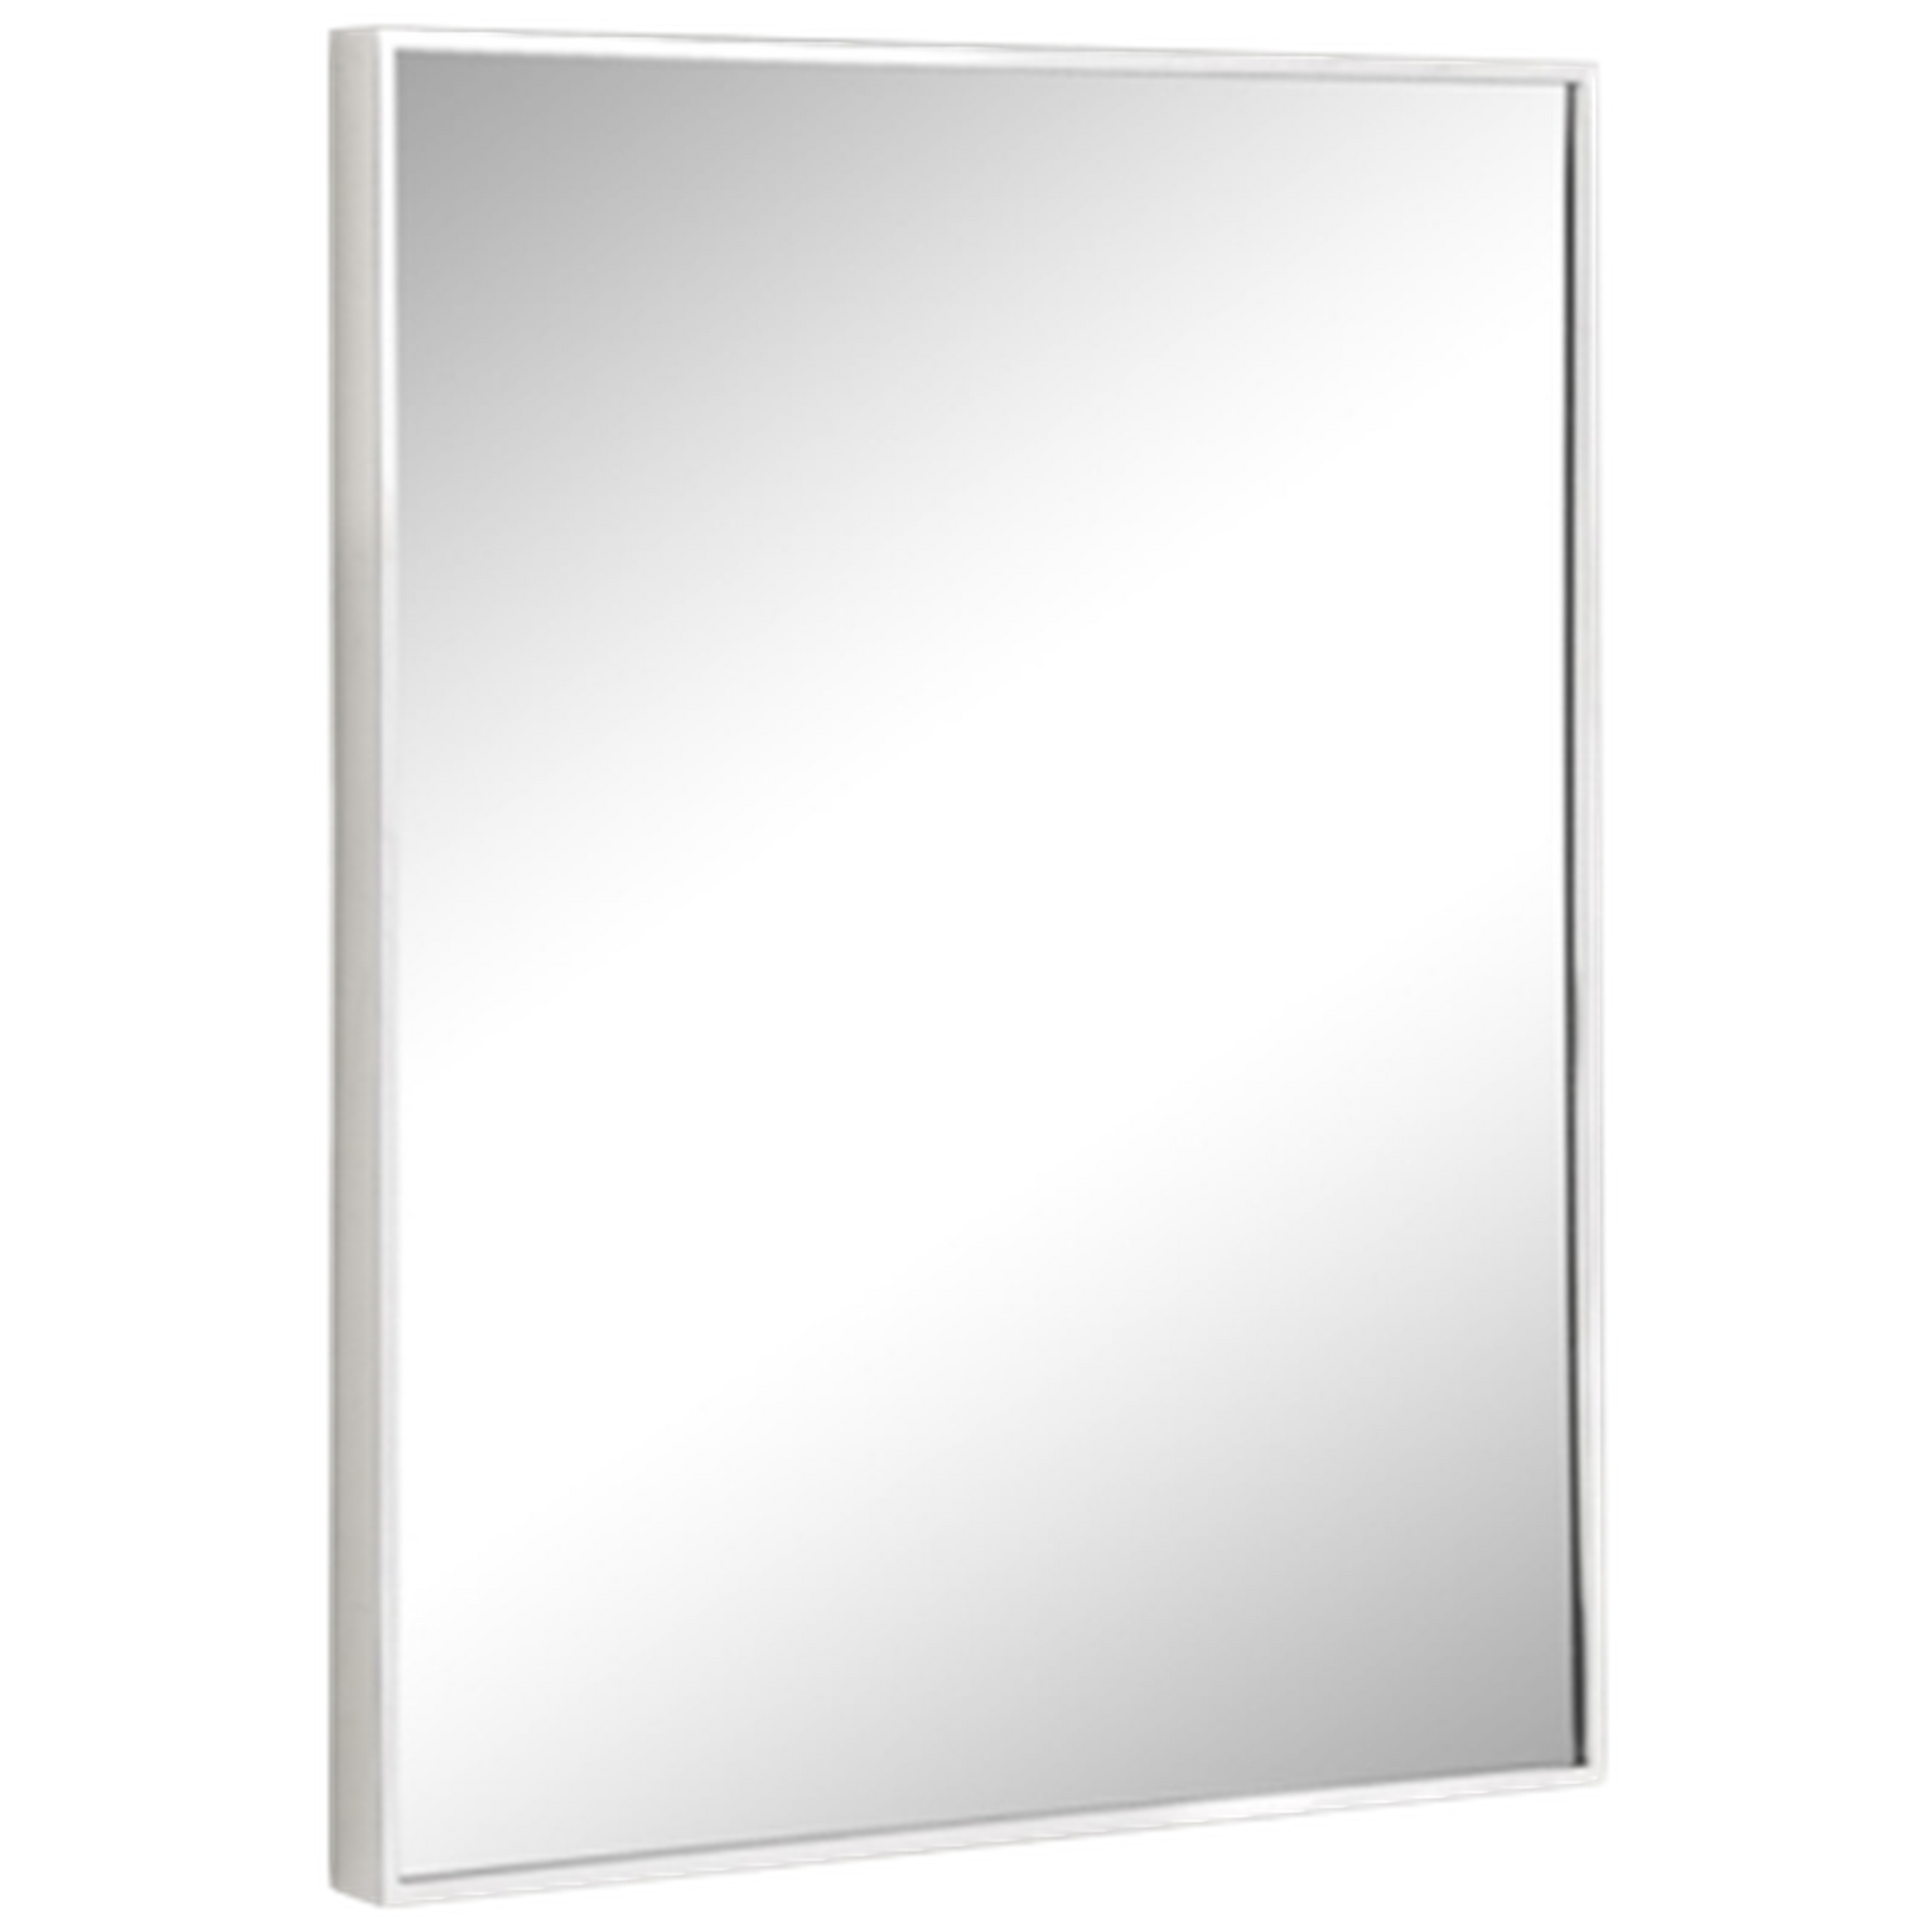 Afina Urban Steel 24" x 30" Polished Stainless Steel Frame Wall Mirror